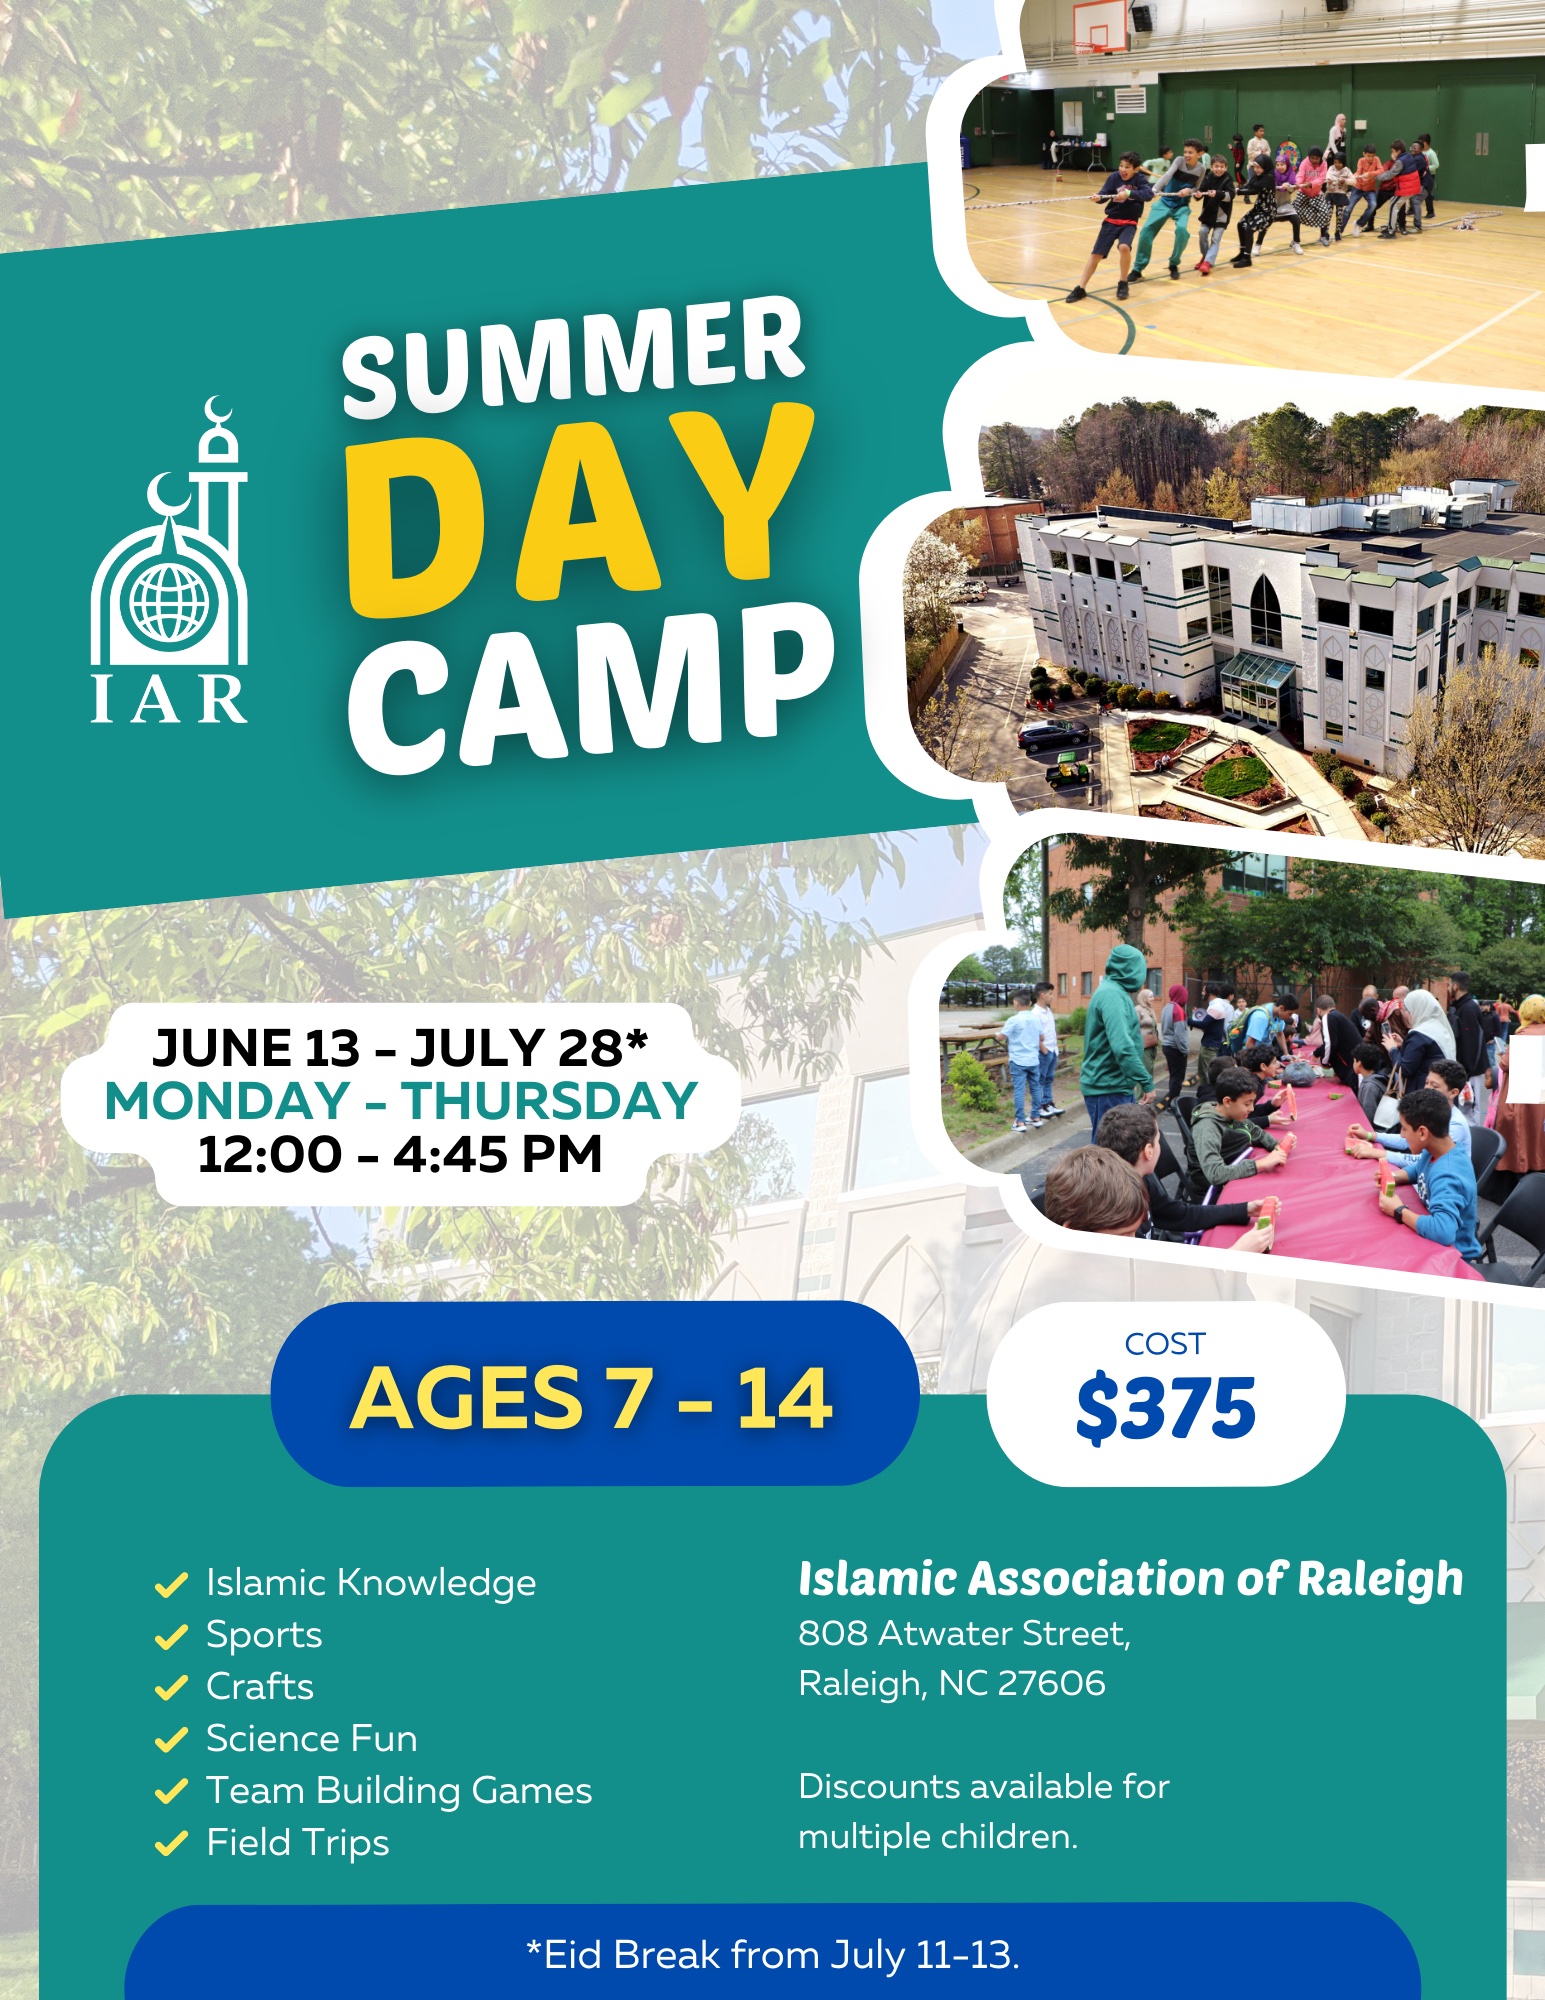 Annual Summer Day Camp